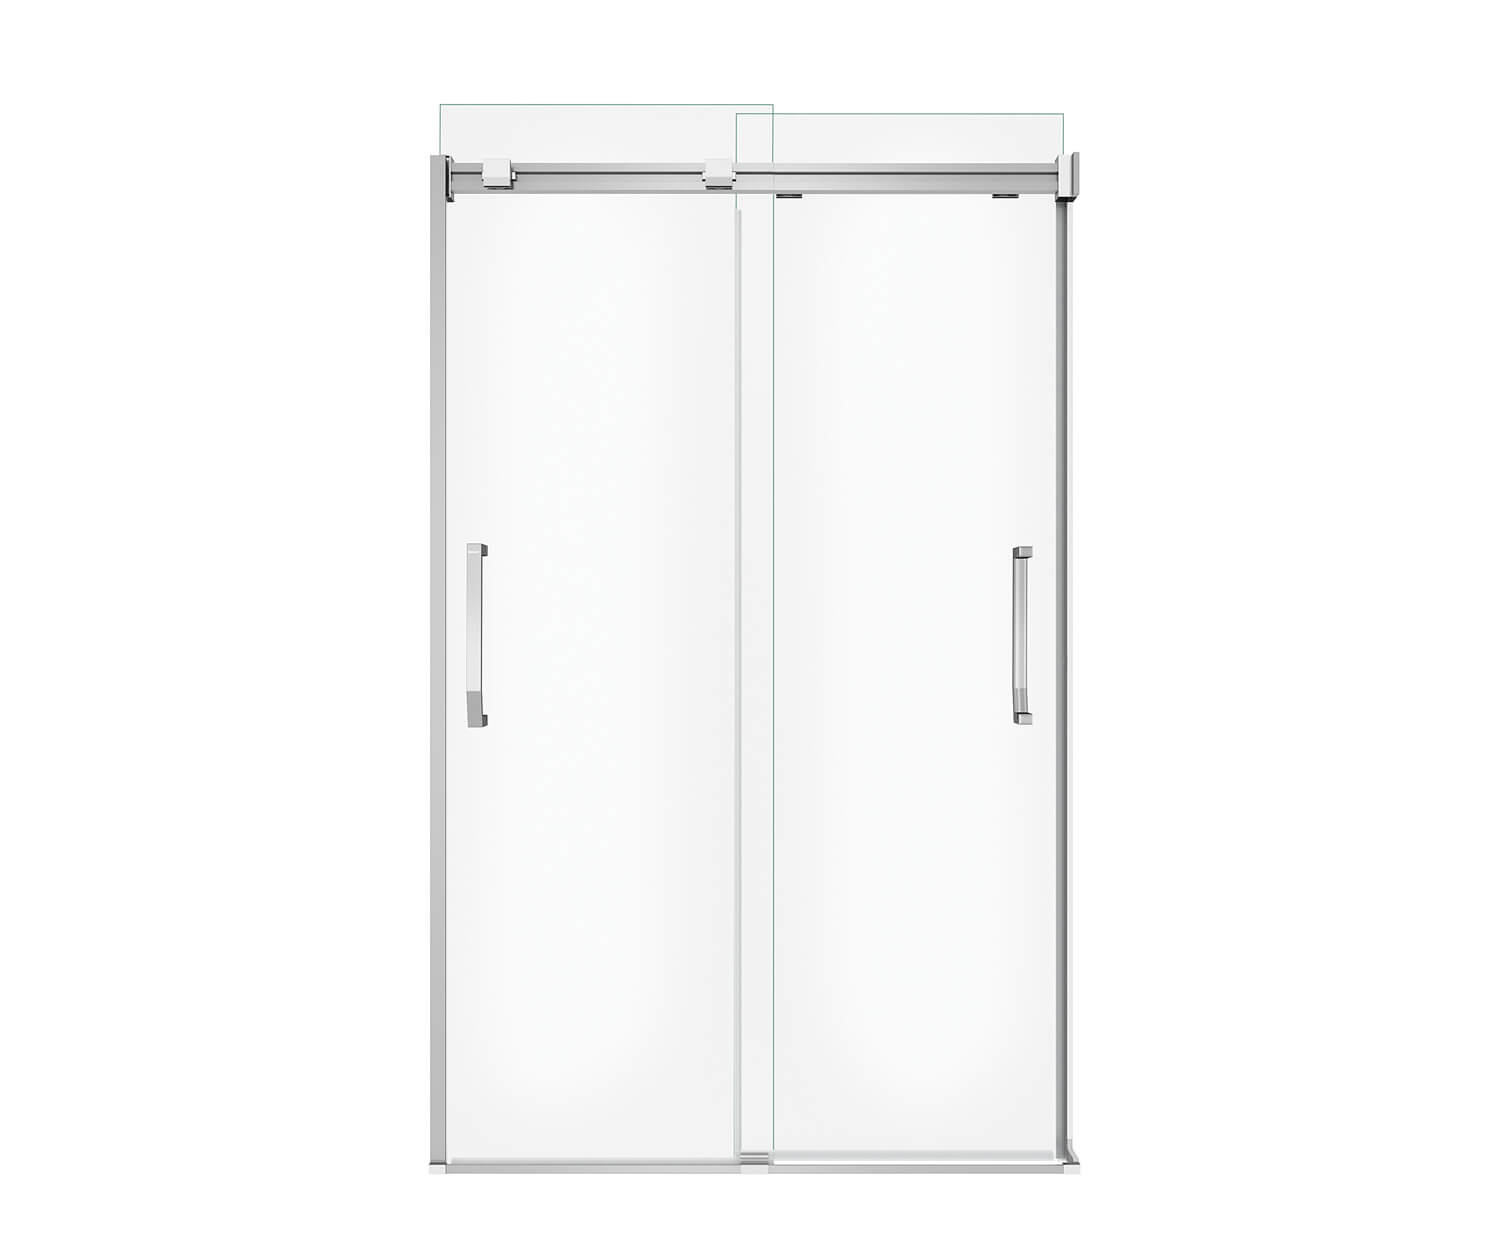 Inverto 43-47 x 70 ½-74 in. 8mm Bypass Shower Door for Alcove 